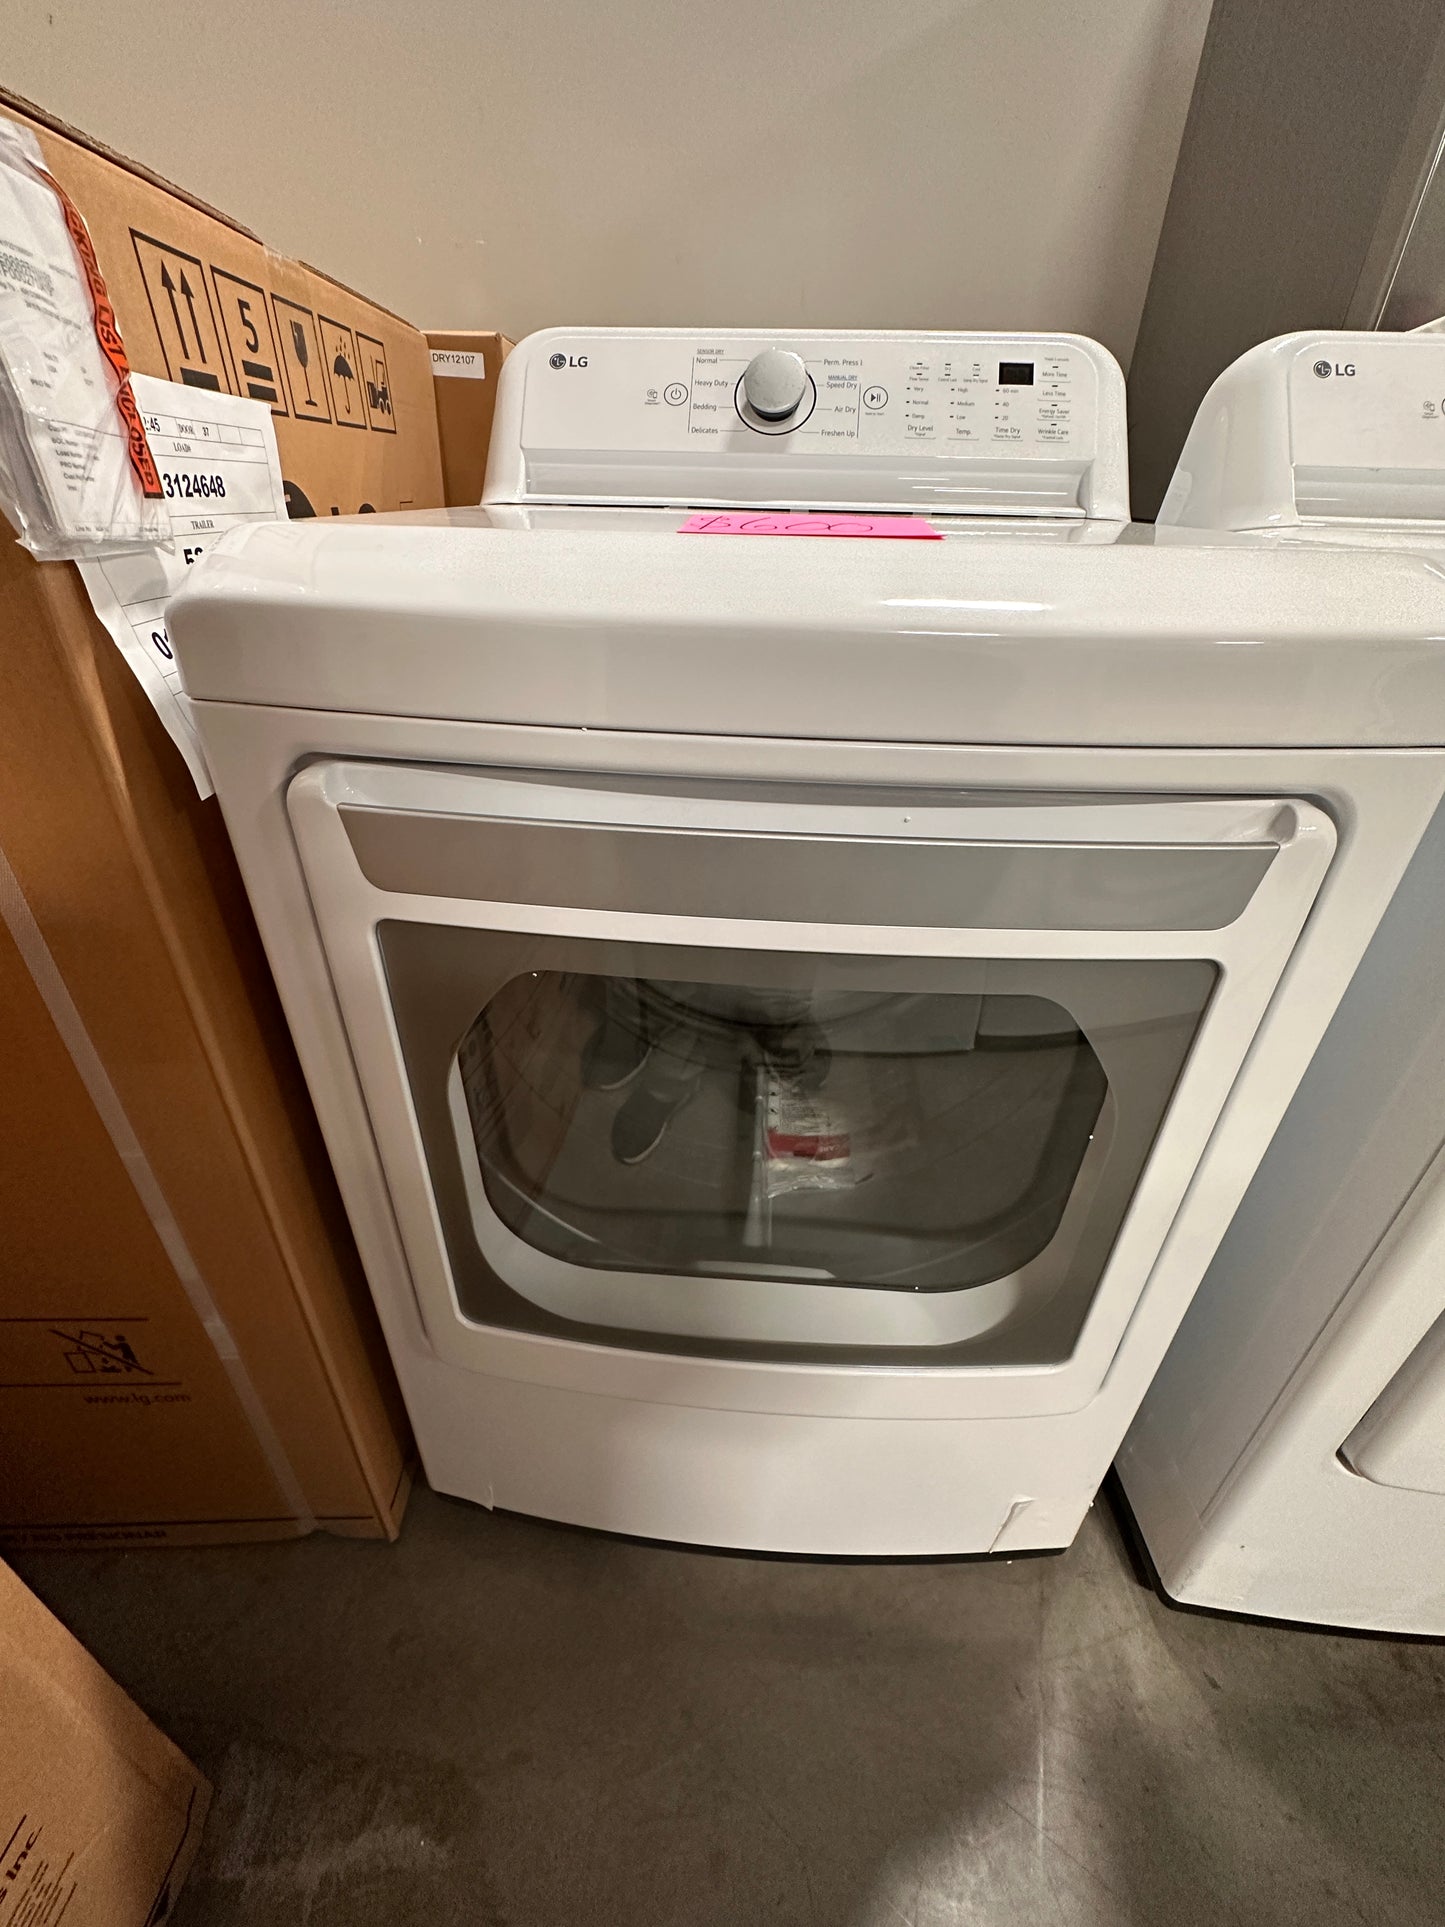 BRAND NEW LG ELECTRIC DRYER WITH SENSOR DRY - DRY12134